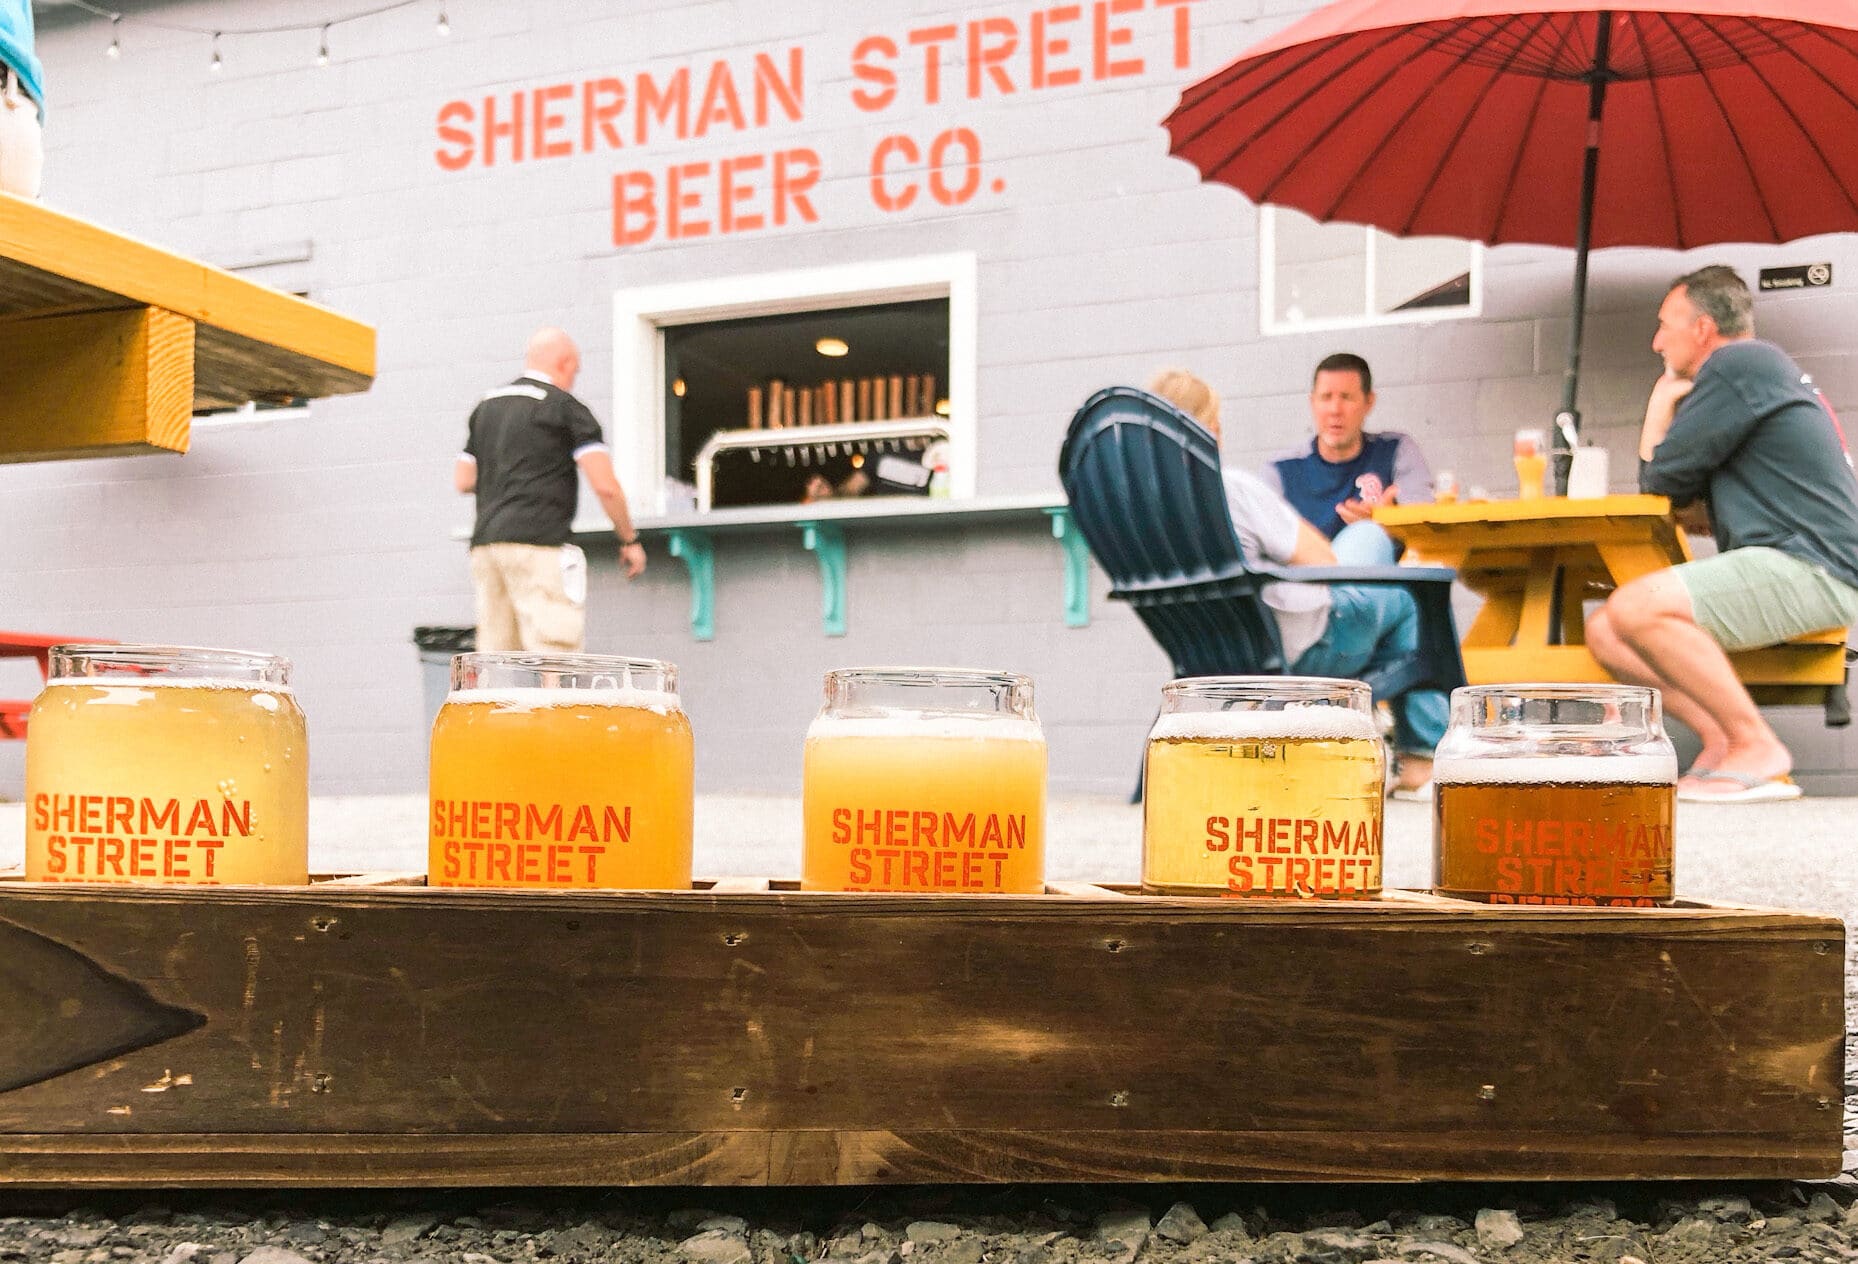 Beer flight with Sherman Street Beer Co. sign and garden in background